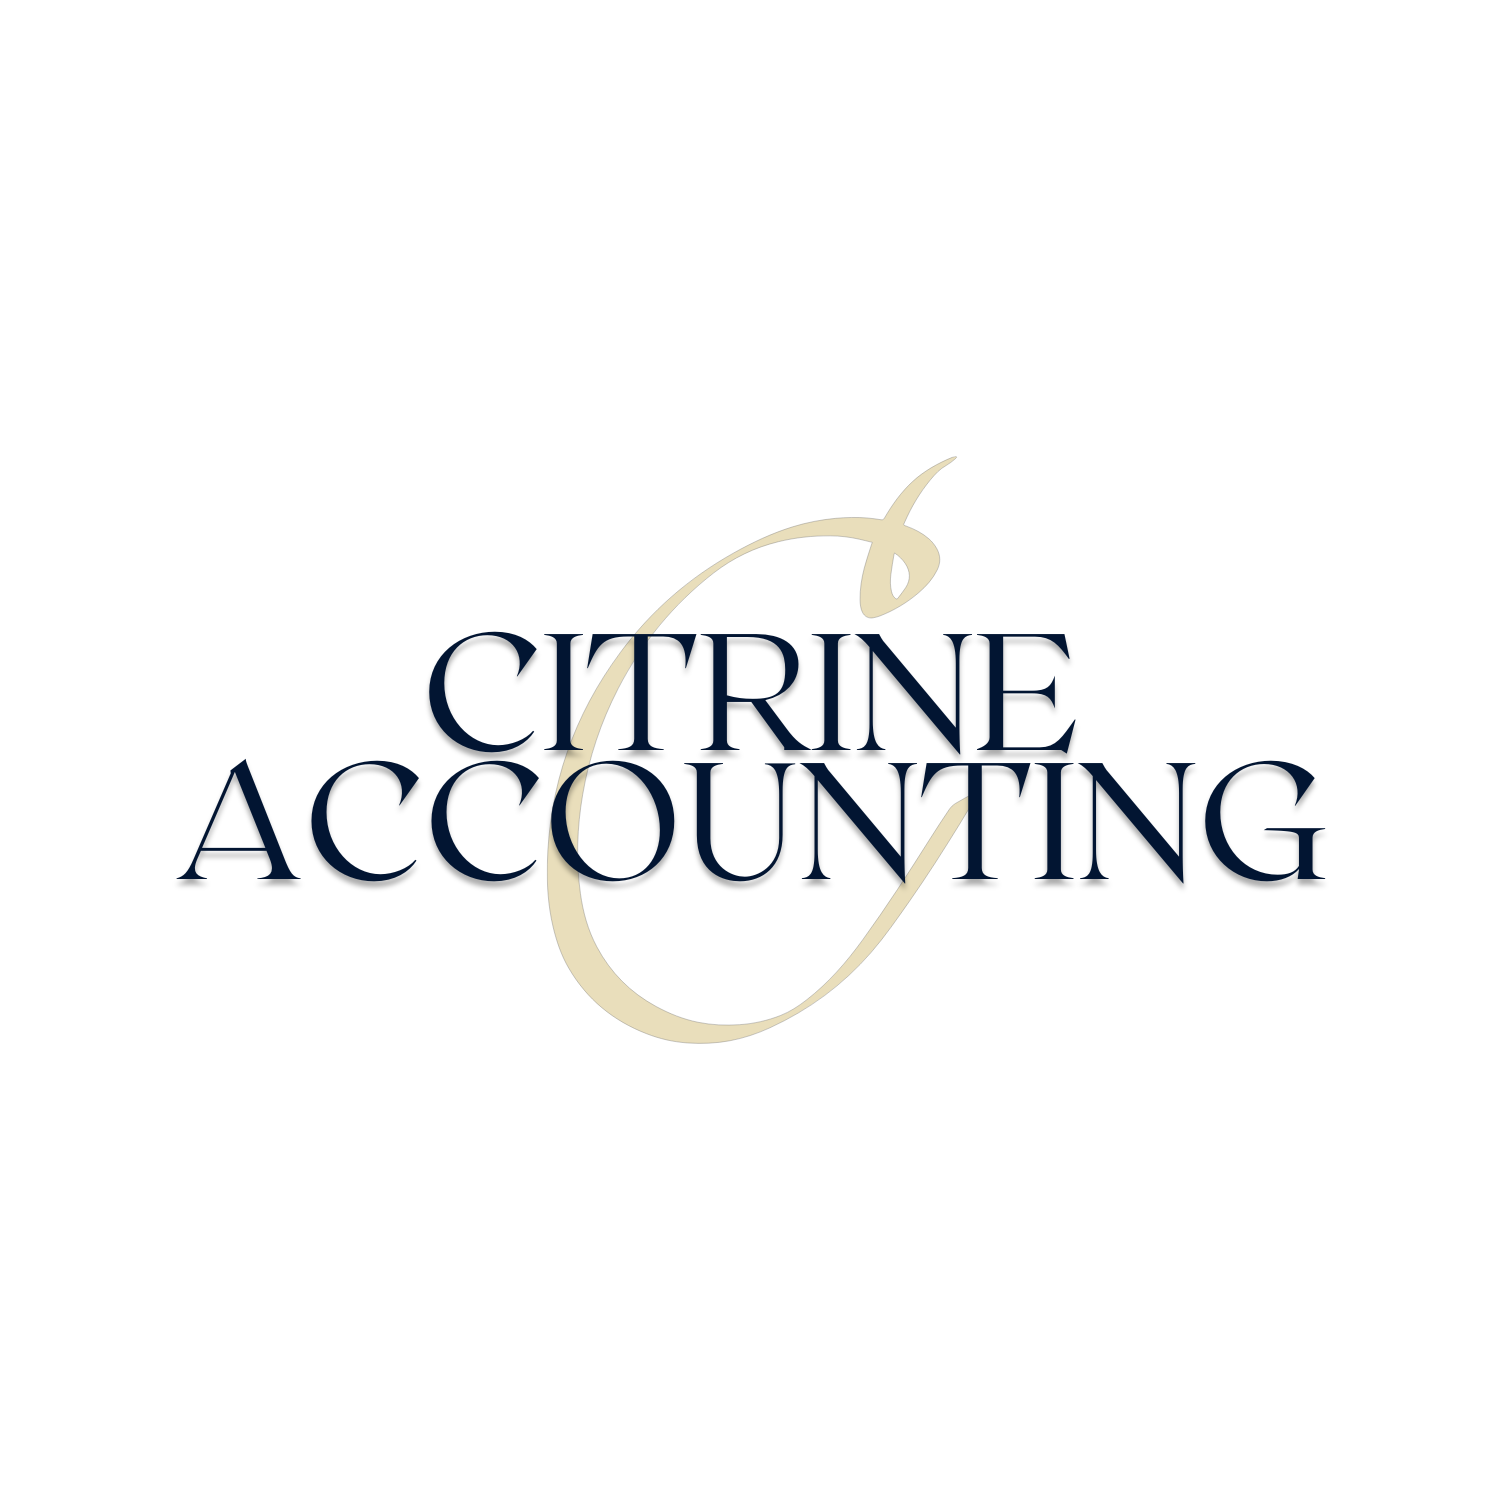 Arizona Based Accounting Company Solving a Massive Problem for Small Business Owners